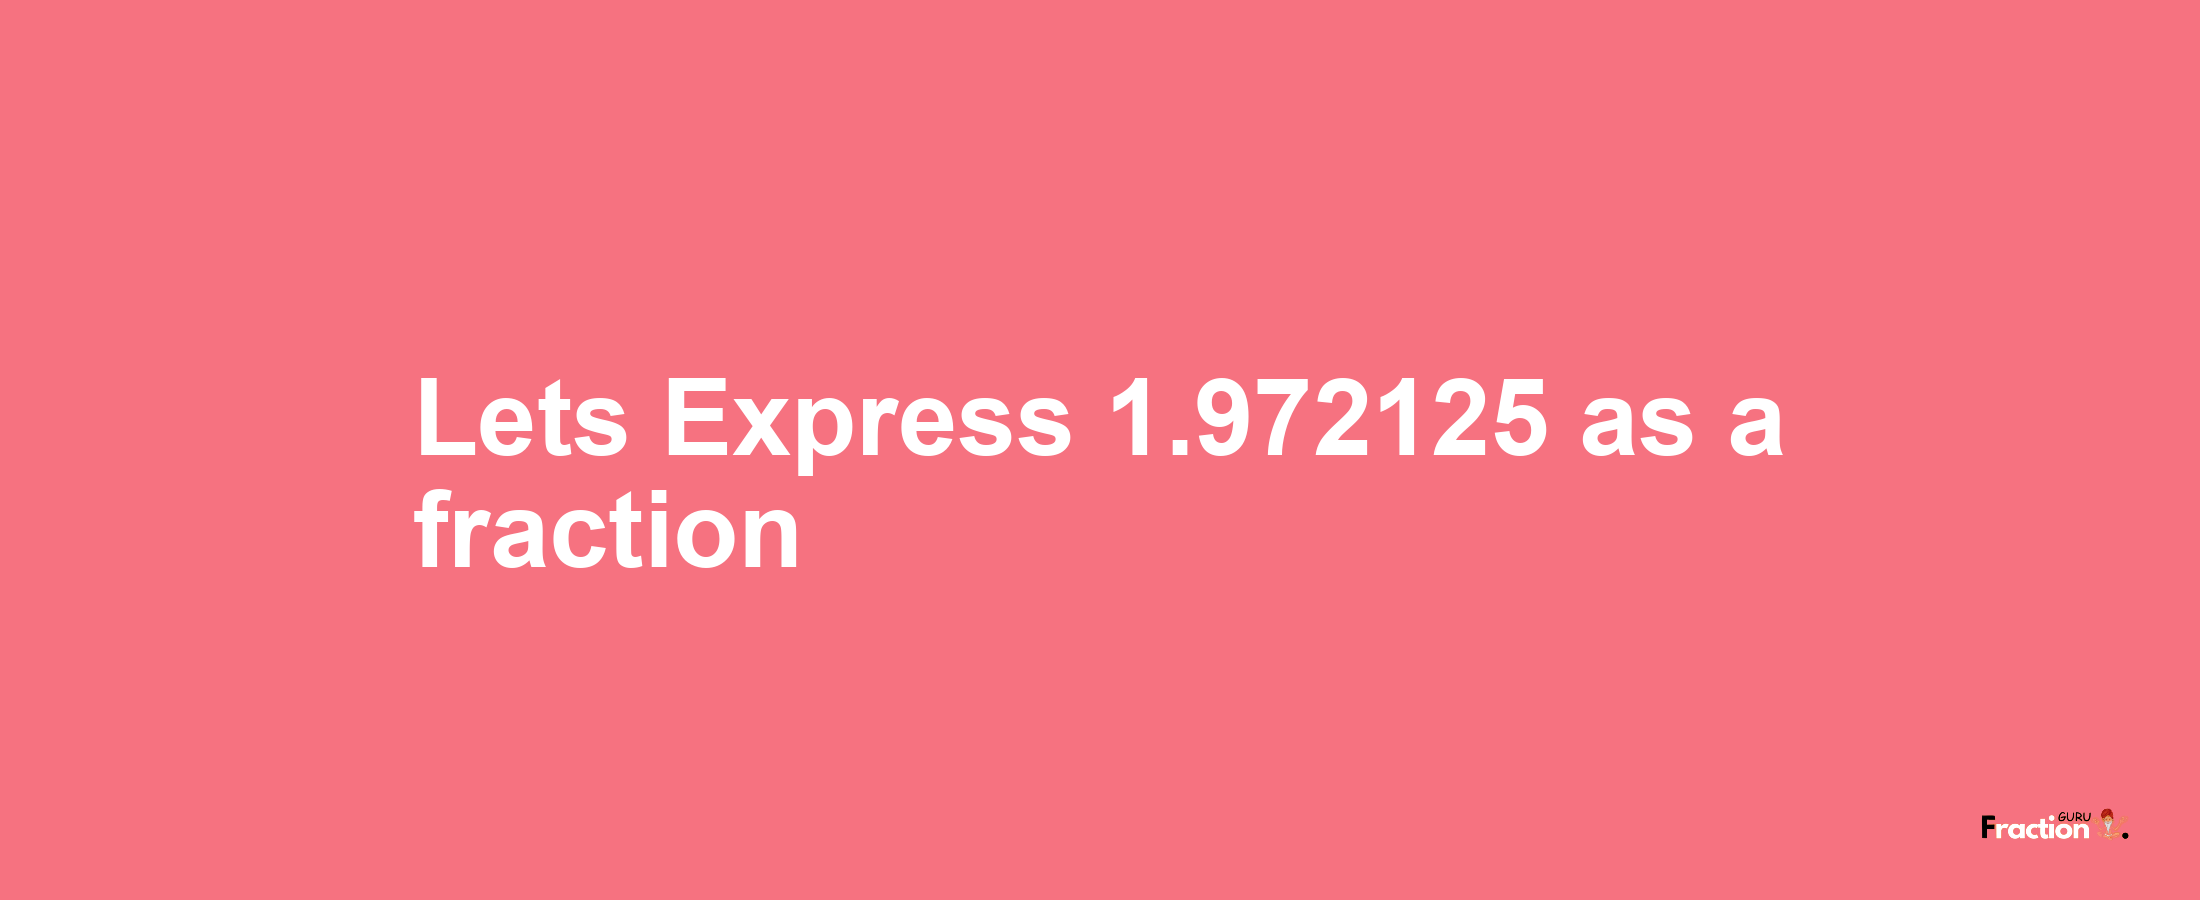 Lets Express 1.972125 as afraction